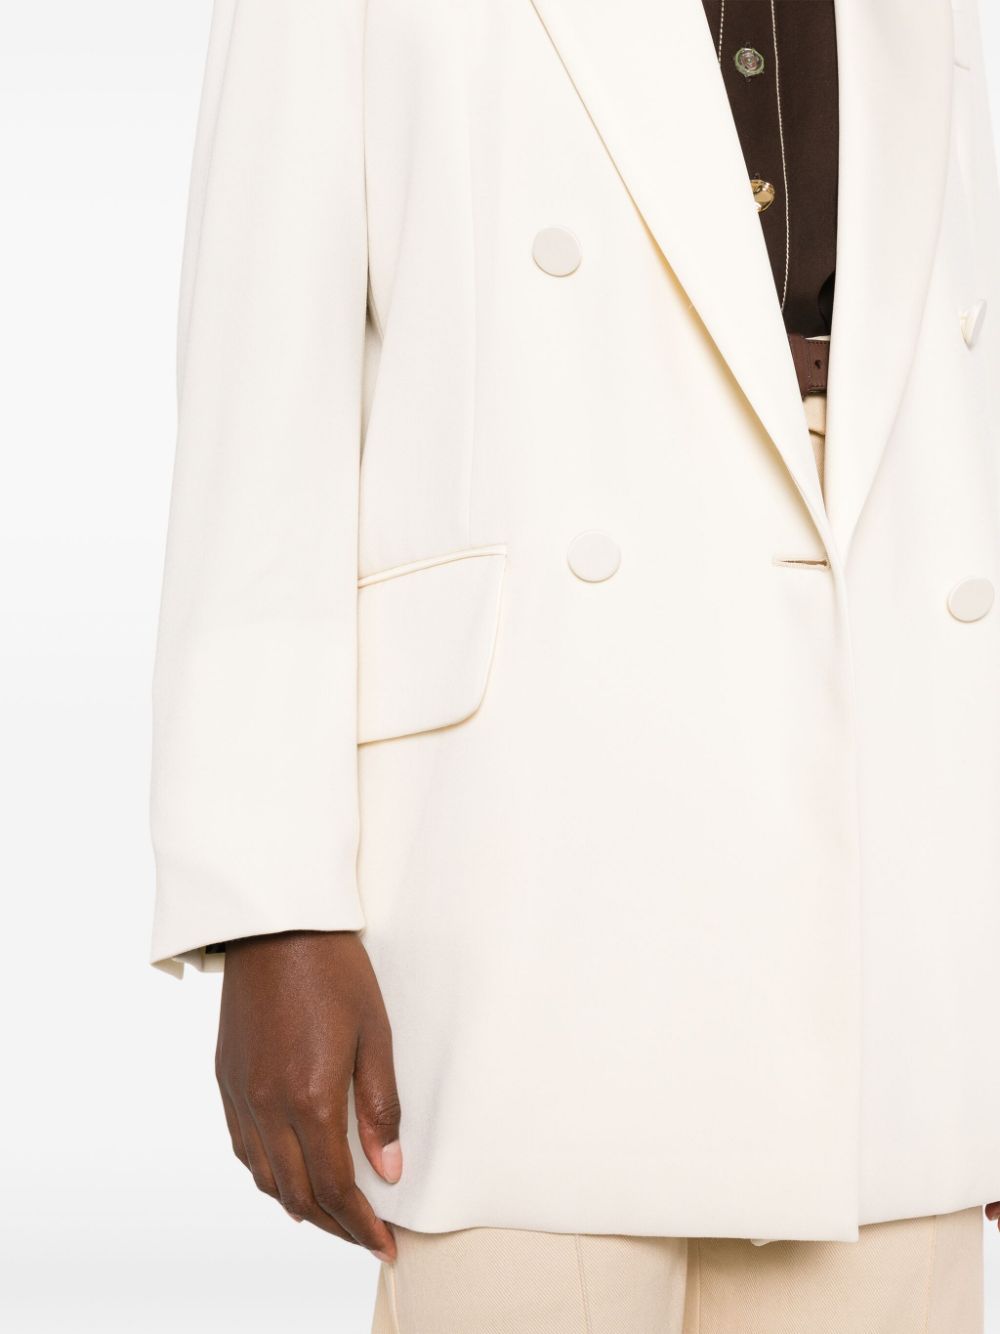 MAX MARA PIANOFORTE Double-Breasted Wool Blazer Jacket for Women in Winter White - FW23 Collection